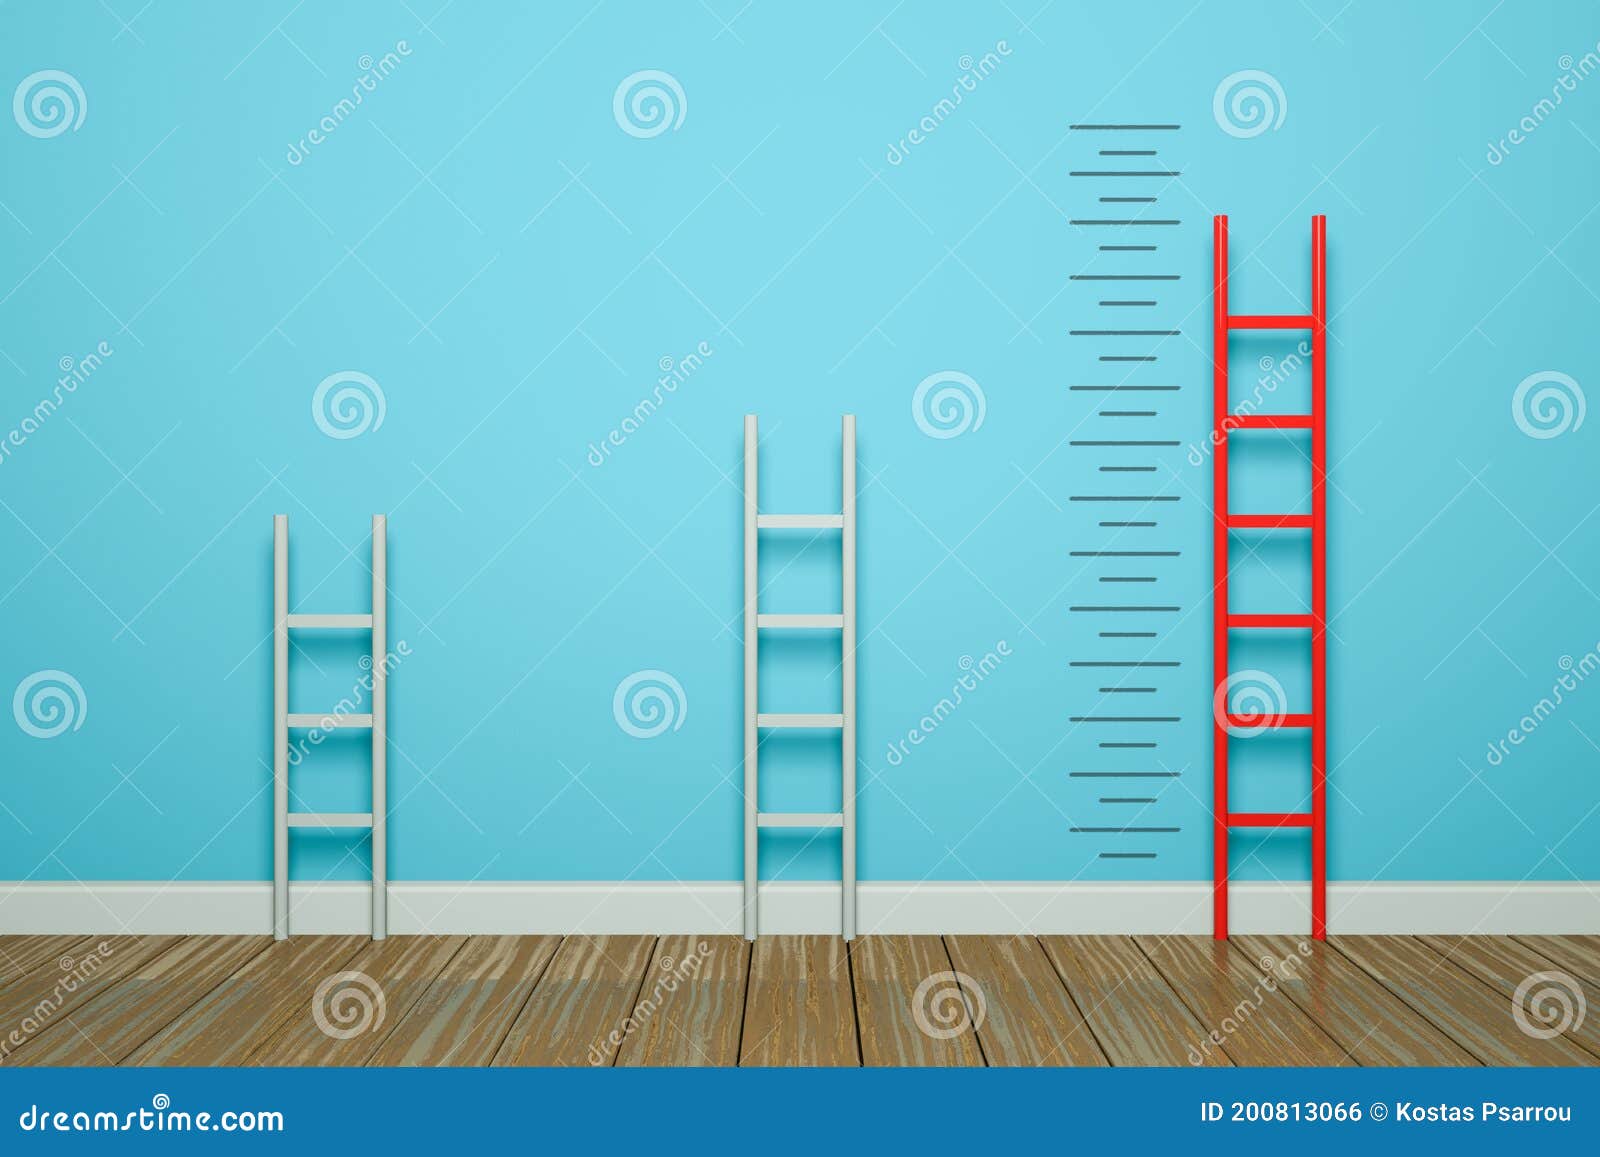 Three Ladders Are Measuring Among Red Ladder Stock Illustration Illustration Of Business Freedom